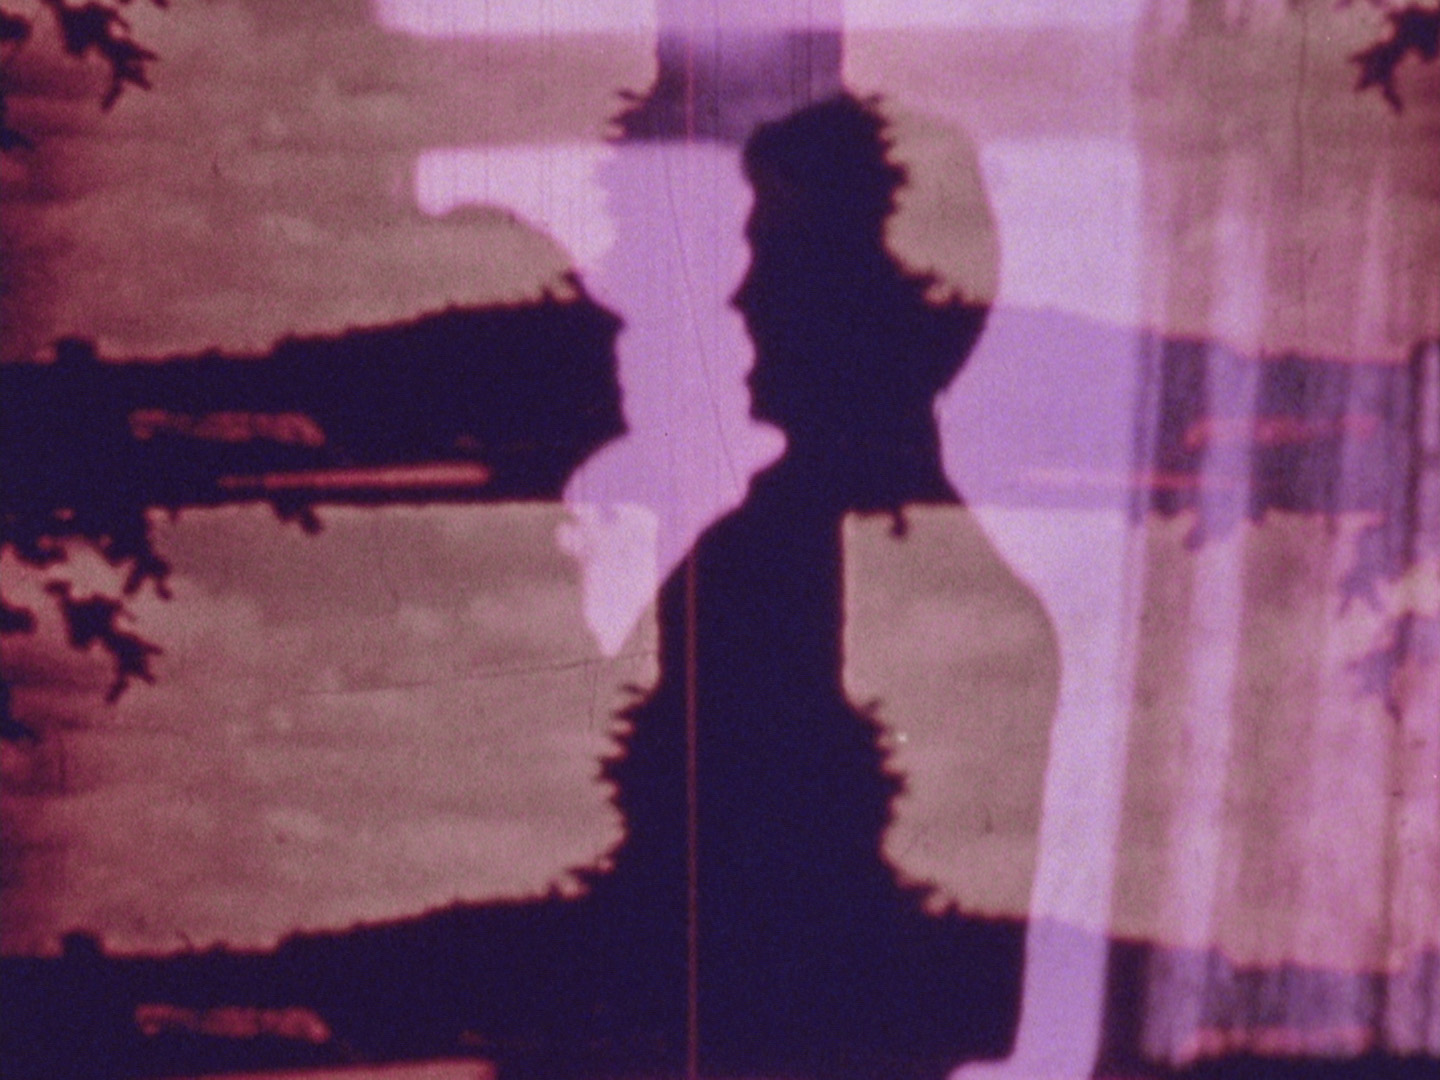 side profile of a figure, overlayed with an abstract image